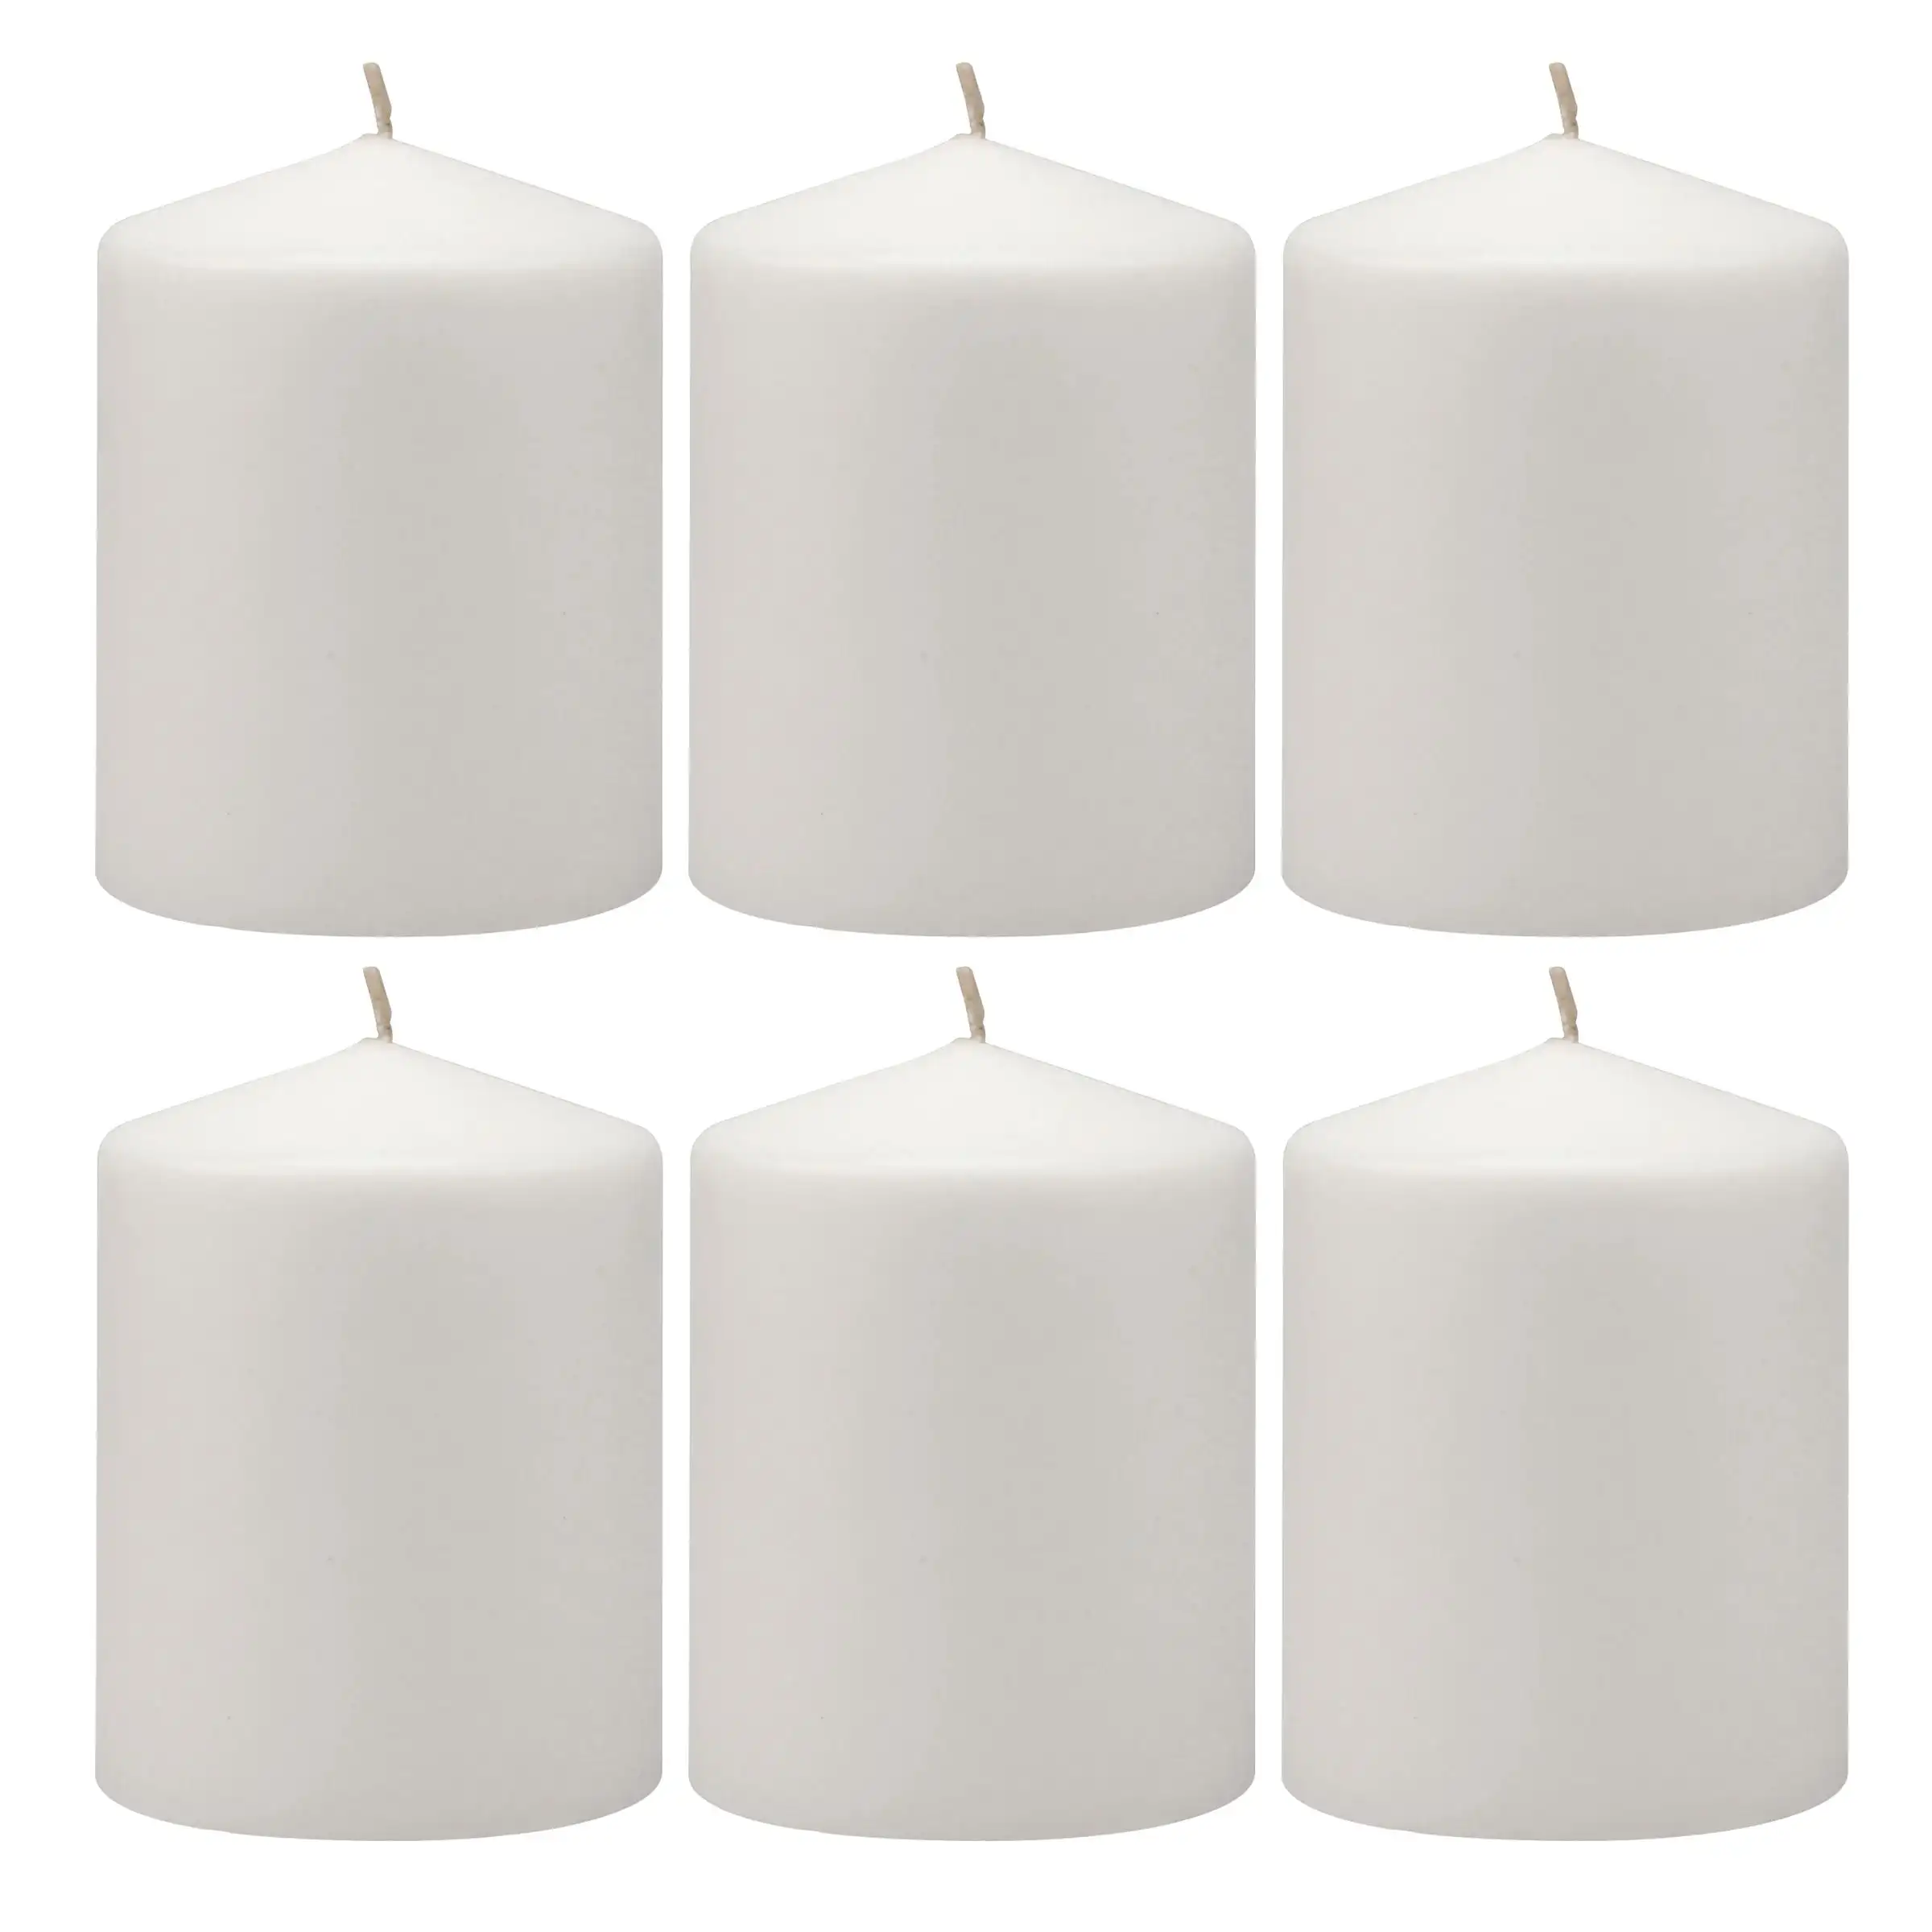 

3" x 4" Unscented 1-Wick White Pillar Candles, 6 Pack